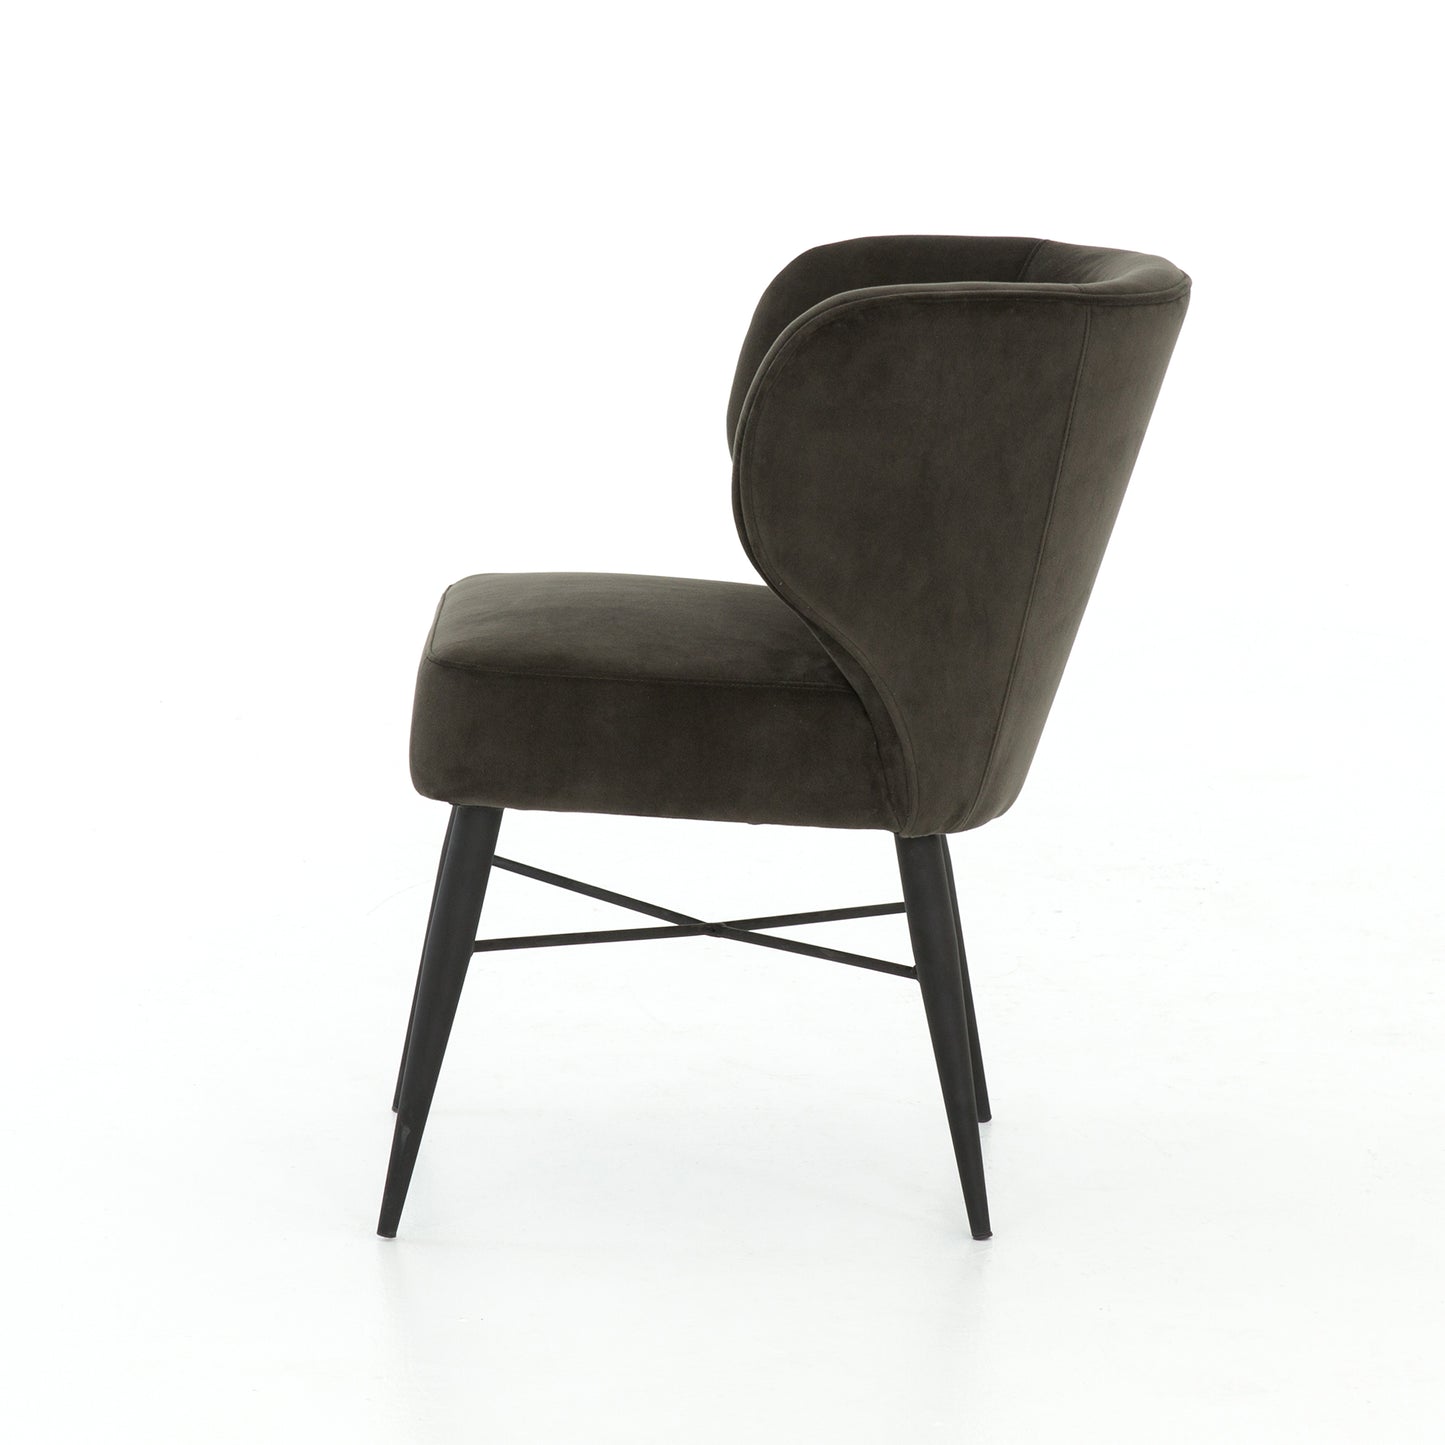 Rennes Dining Chair